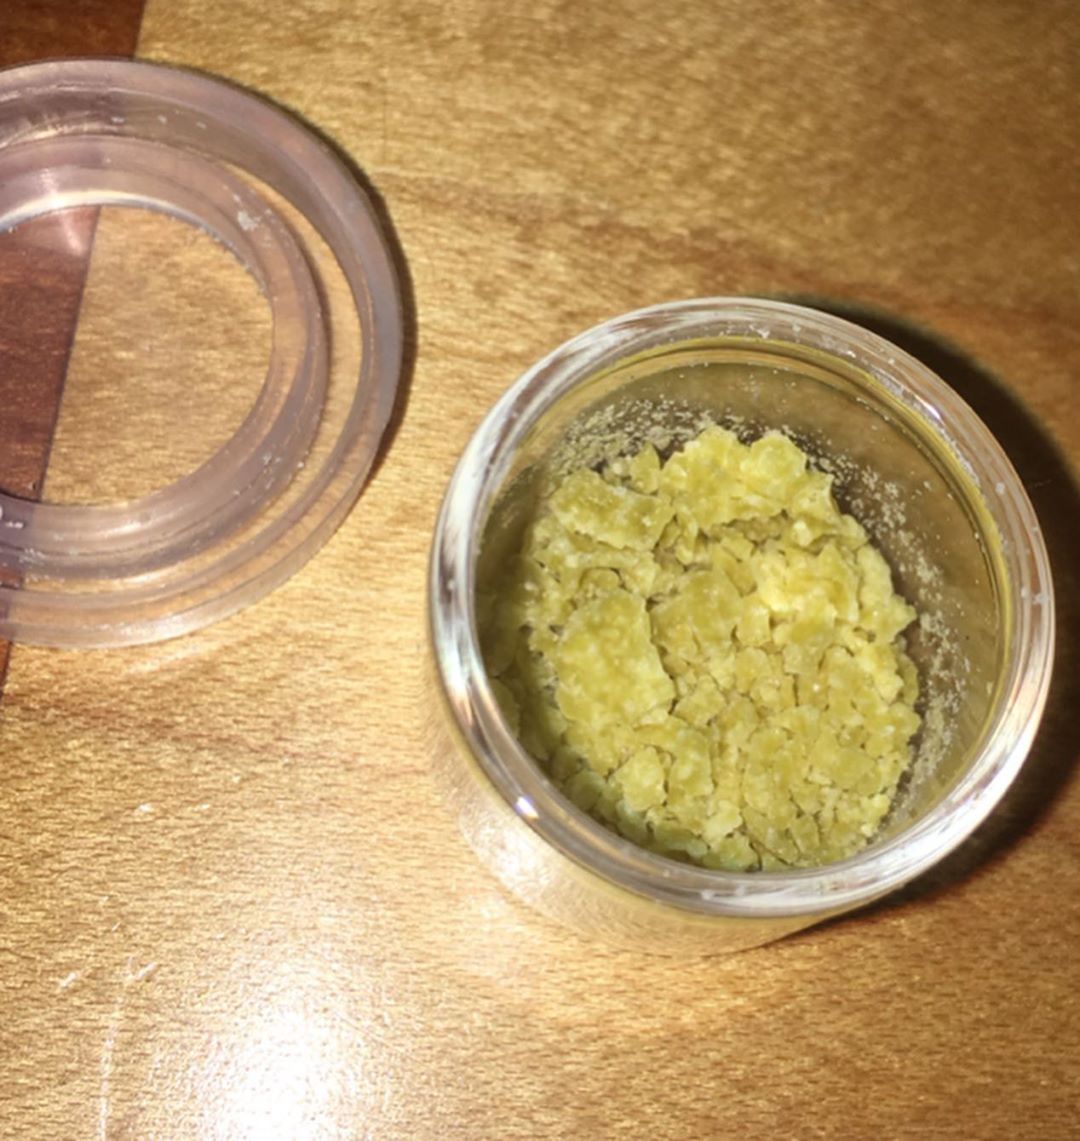 durban margy concentrate from MUV florida concetrate strain review by indicadam